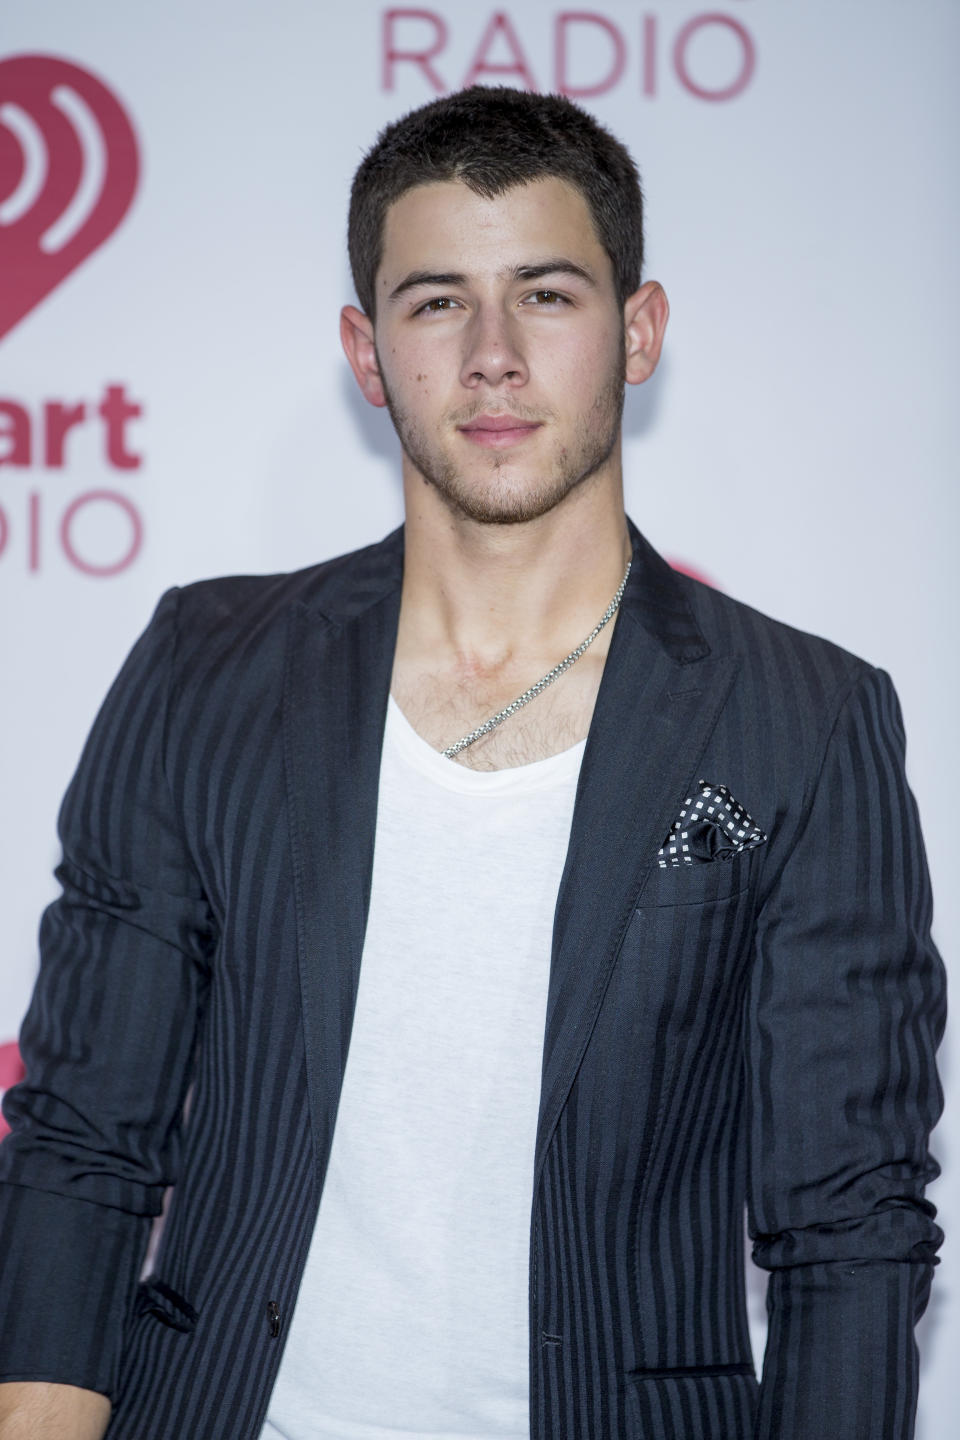 Nick Jonas arrives at the iHeartRadio Music Festival, Friday Sept. 19, 2014, at The MGM Grand Garden Arena in Las Vegas. (Photo by Andrew Estey/Invision/AP)